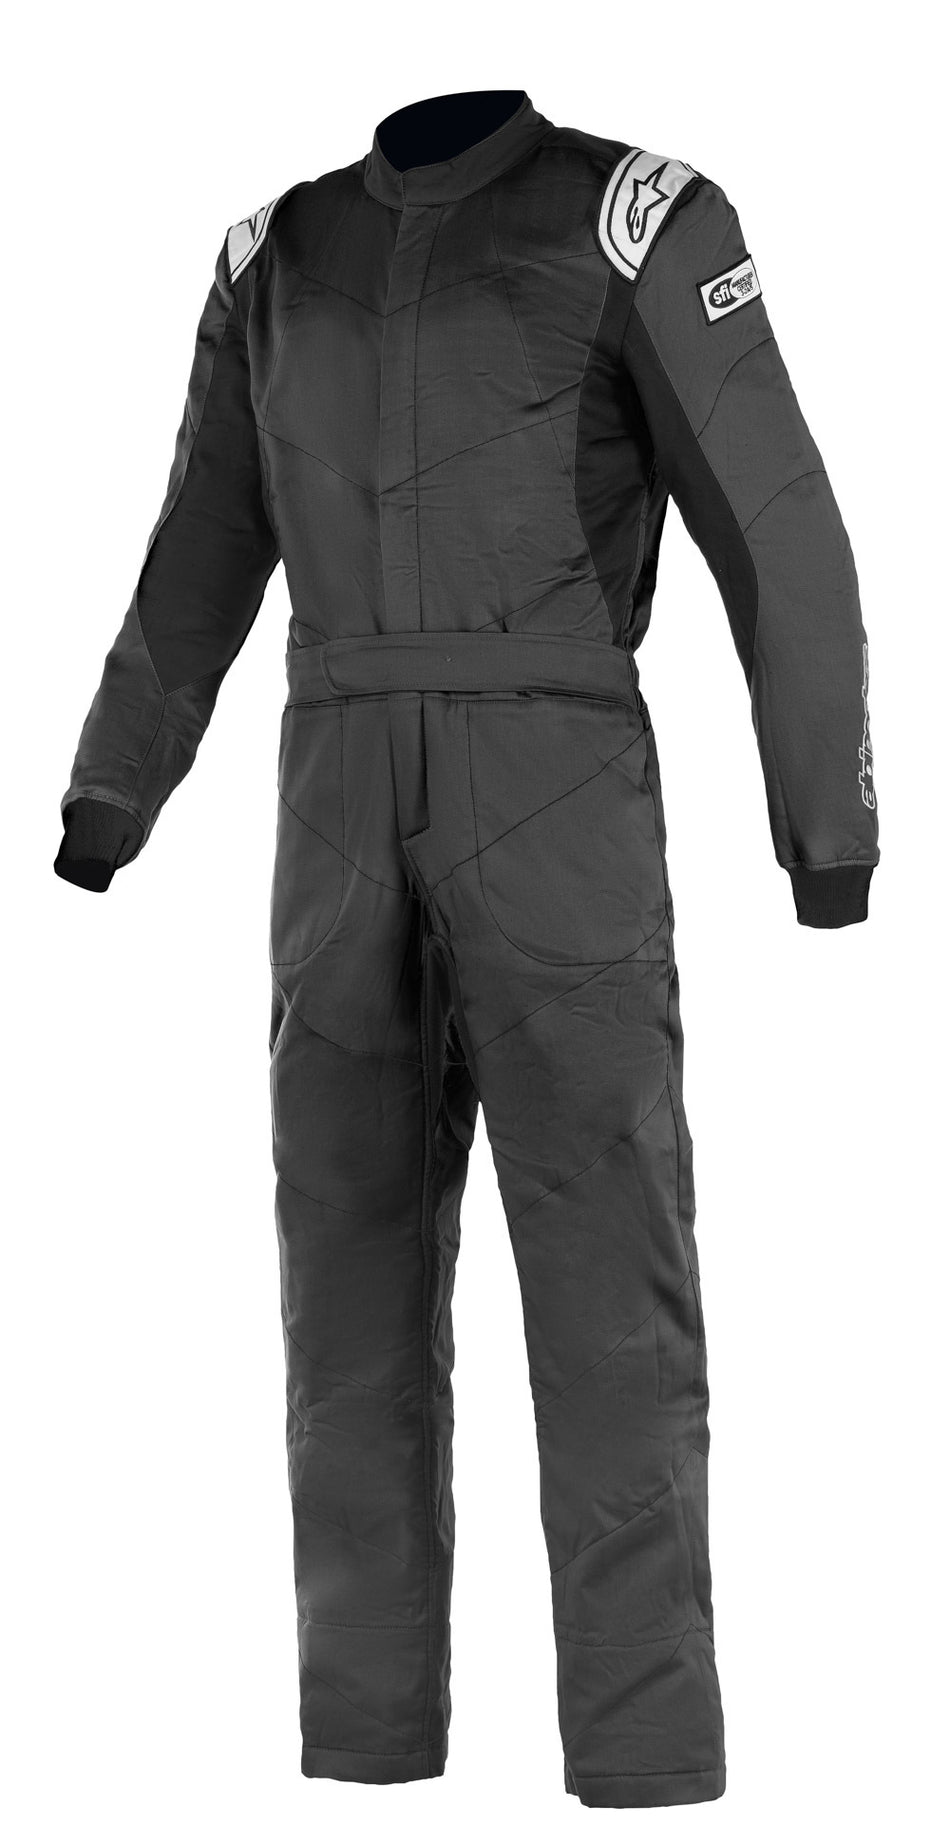 Driving Suit - Knoxville V2 - 1-Piece - SFI 3.2A/5 - Boot-Cut - Triple Layer - Fire Retardant Fabric - Black - Size 48 - Small - Each